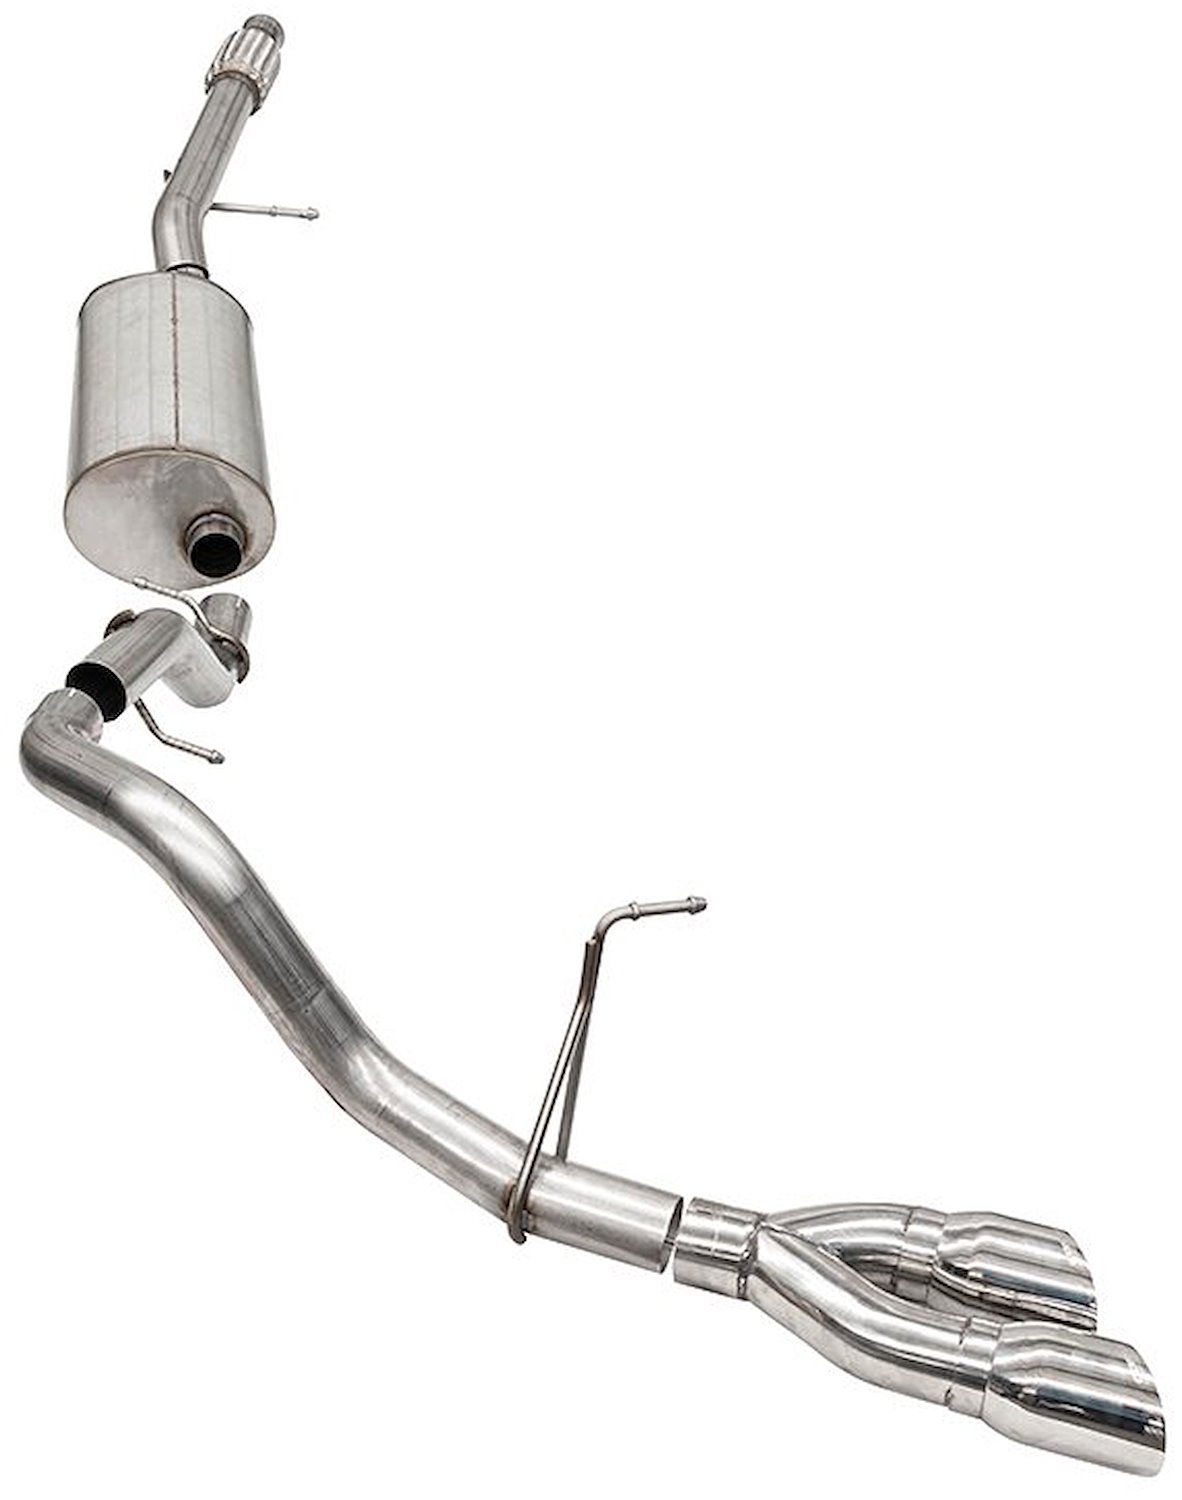 Sport Cat-Back Exhaust System fits Select Late-Model Chevy Suburban 5.3L V8 - Polished Tip